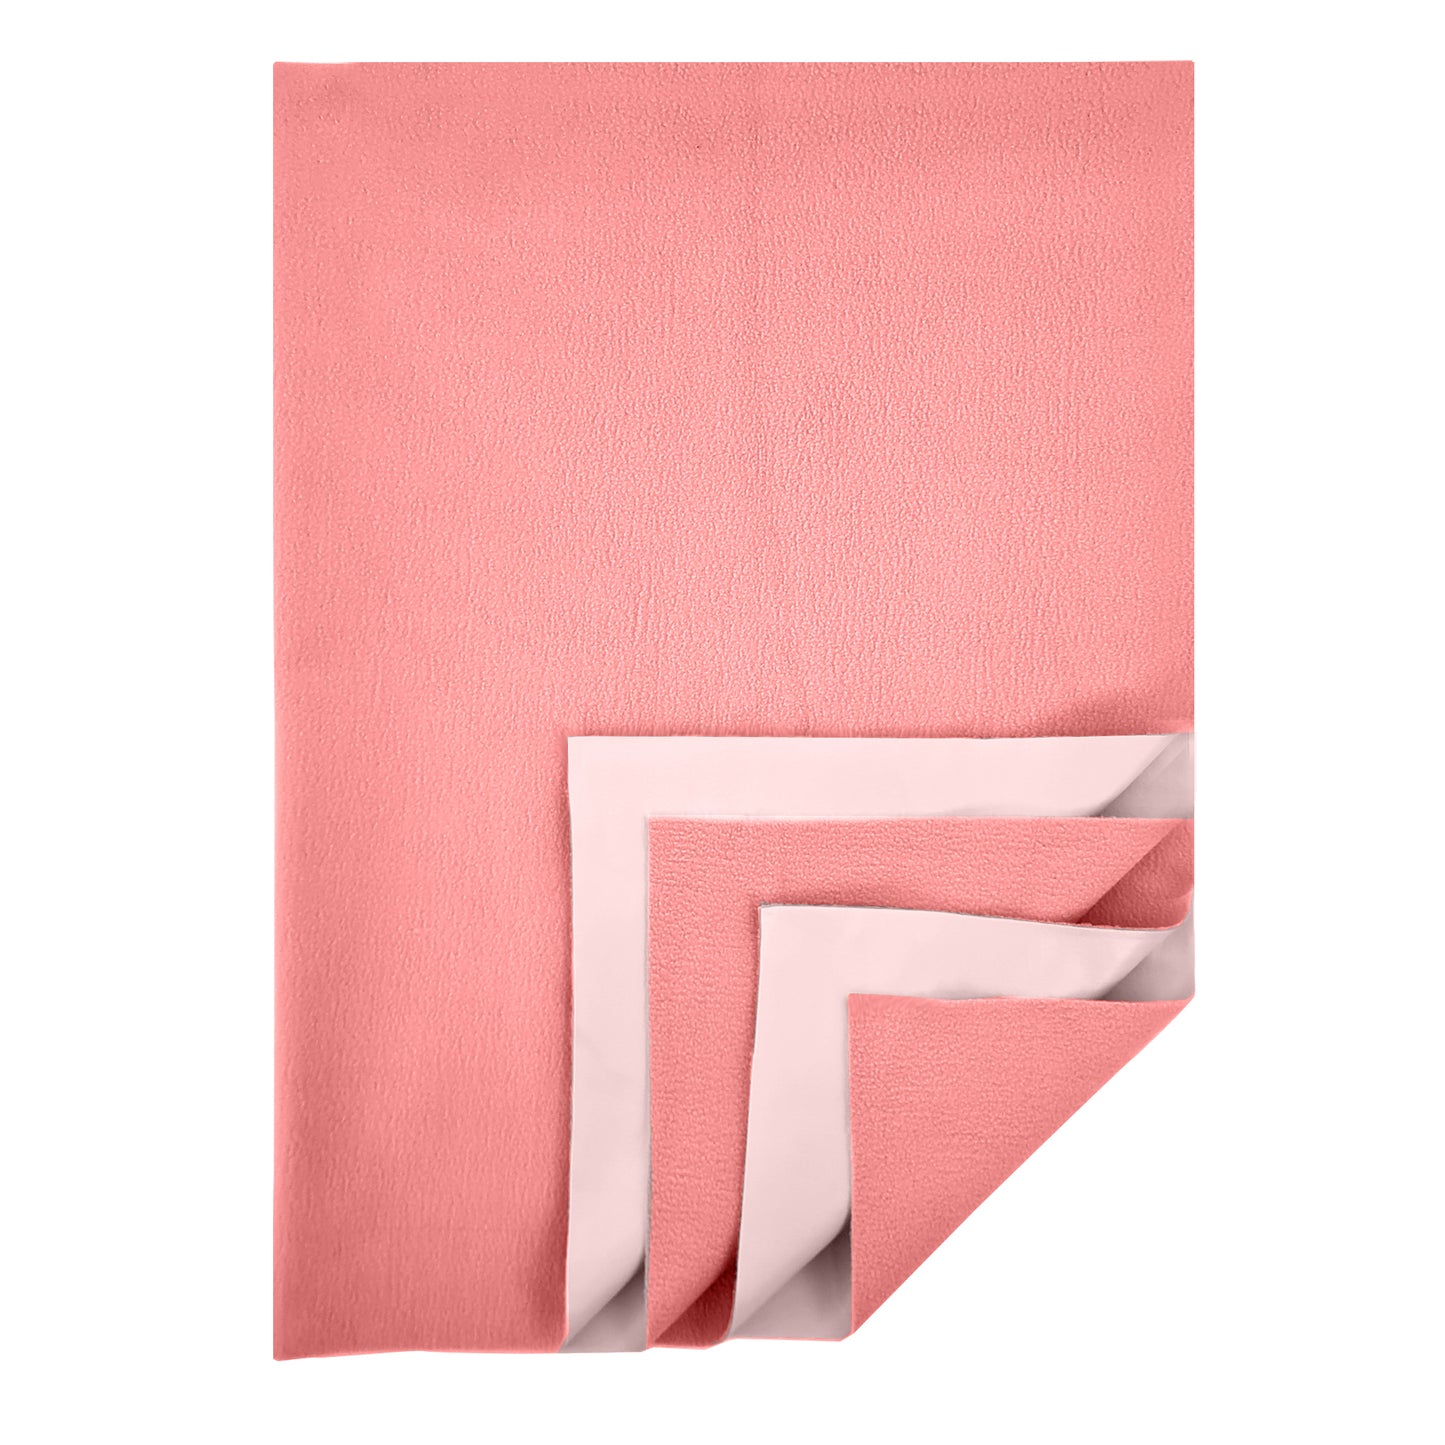 Waterproof Quick Dry Protector Sheet, Baby Bed Protector (140 X 100 CM), Pack of 1 -SELMON ROSE